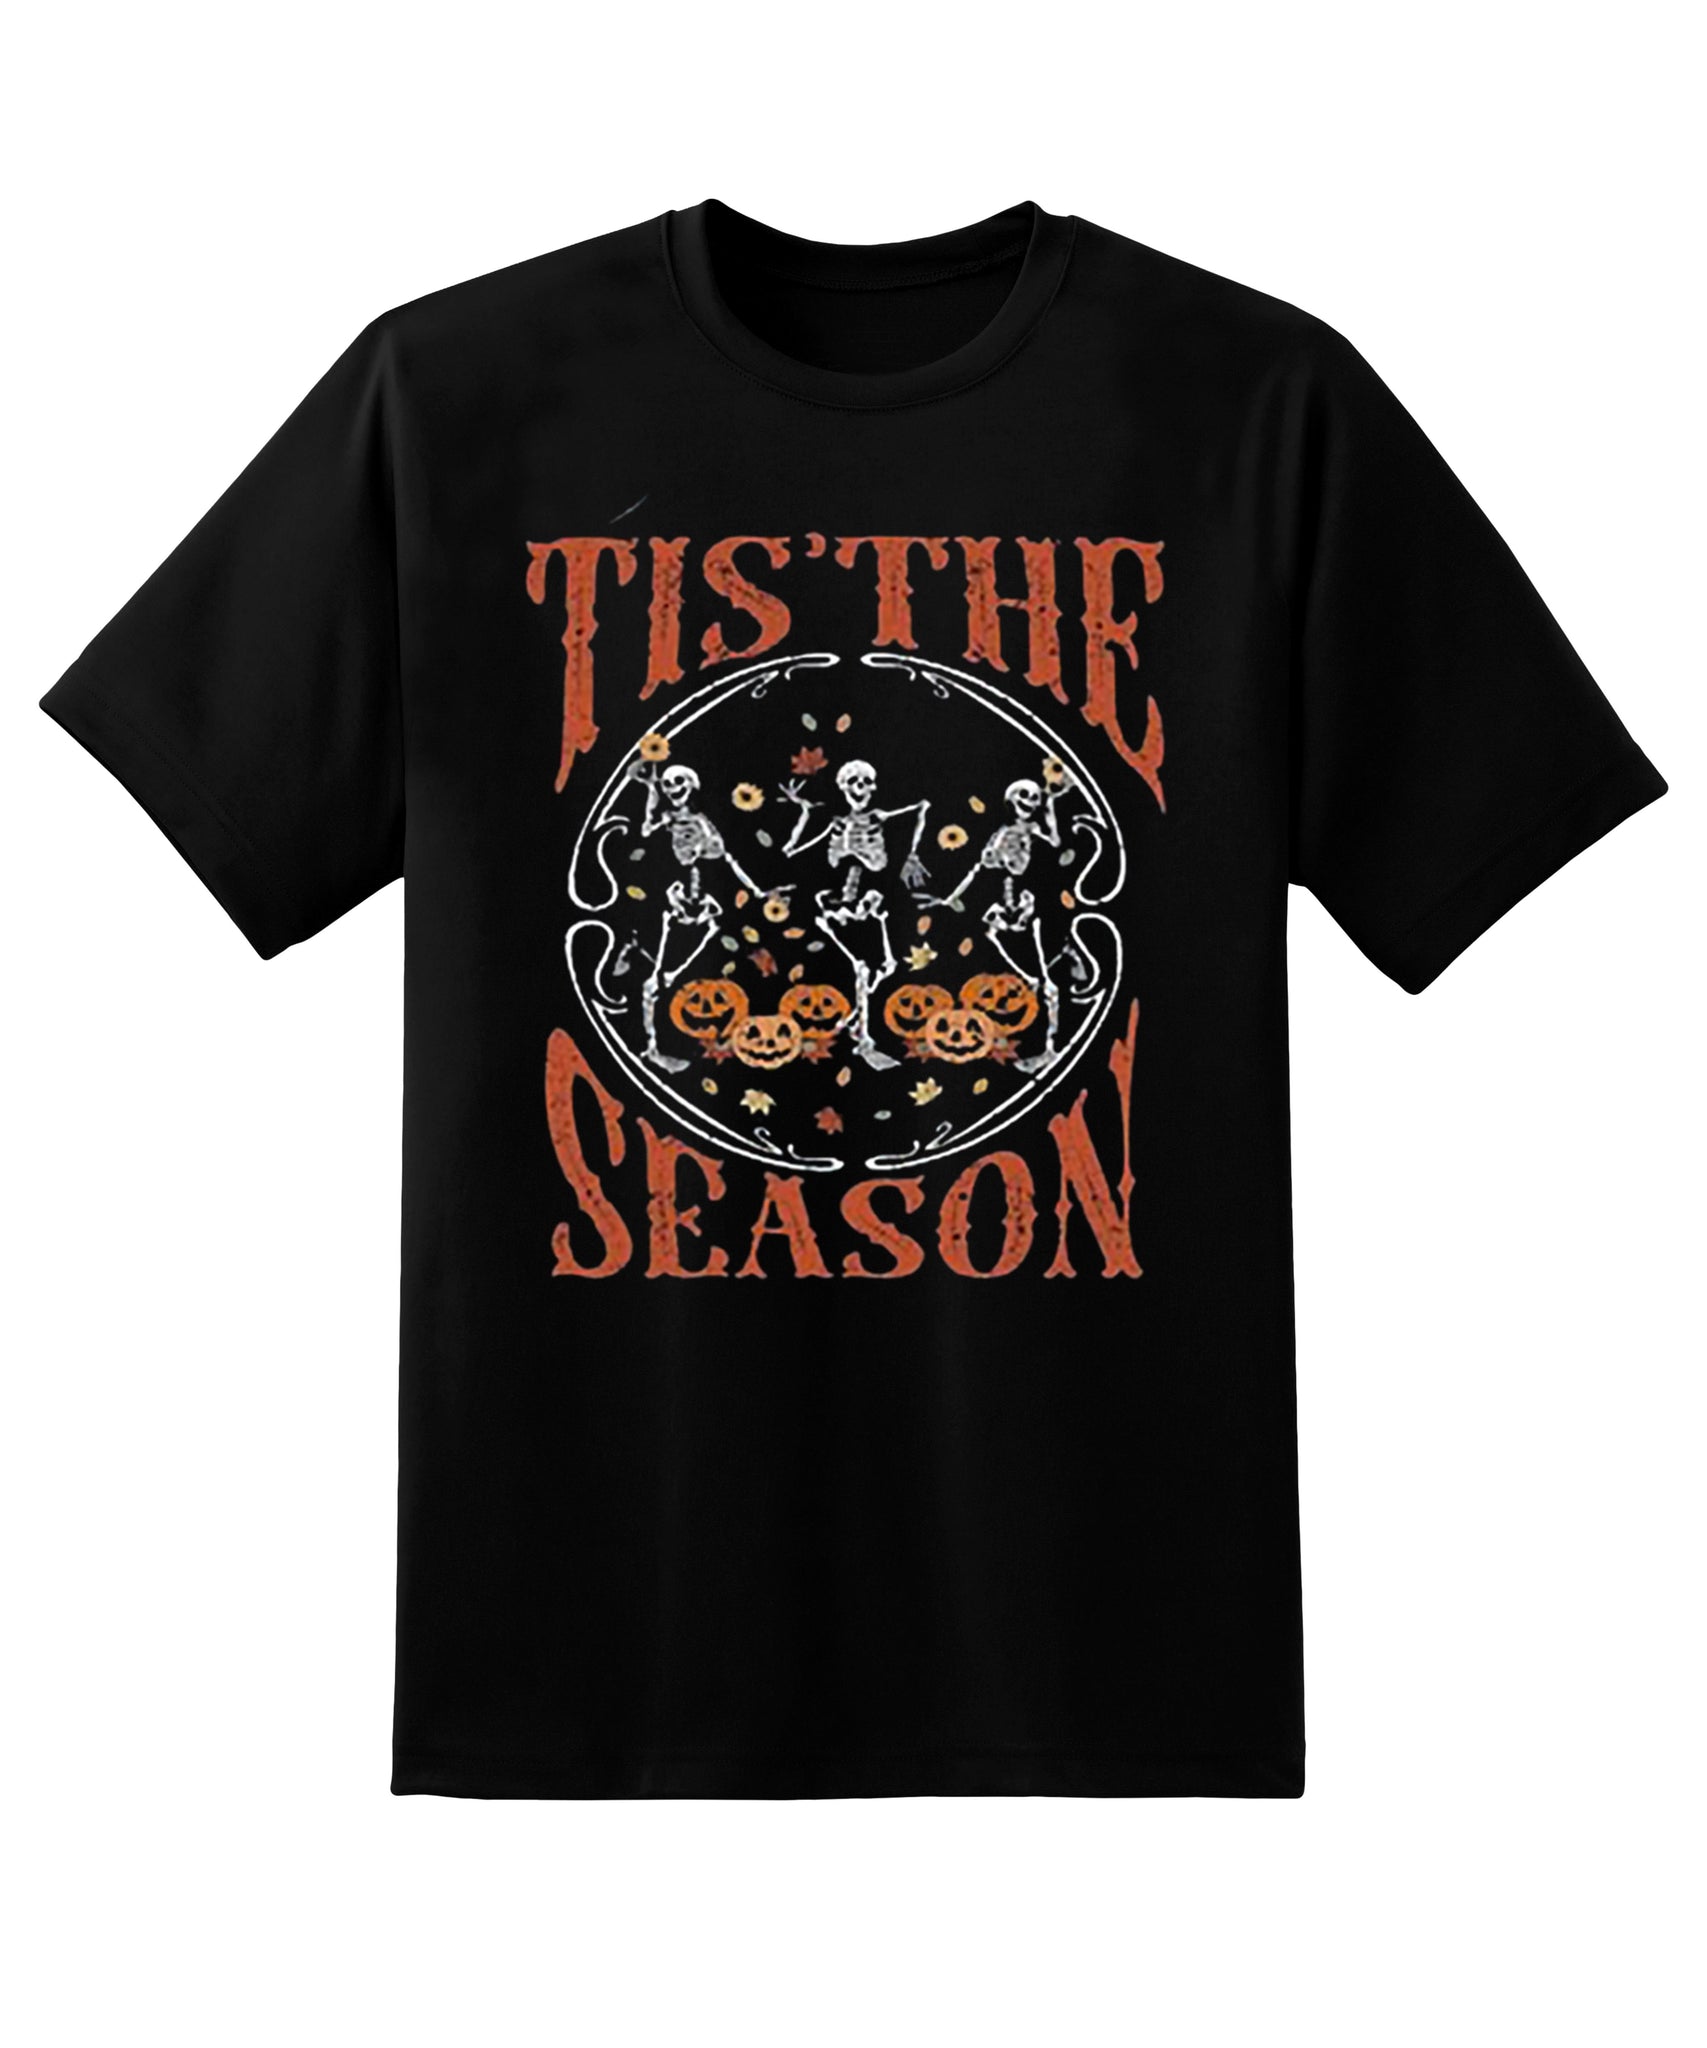 Skitongift This Is The Season To Be Spooky T-Shirt,Spooky Season,Skeleton Pocket T-Shirt,Skeleton Graphic T-Shirt